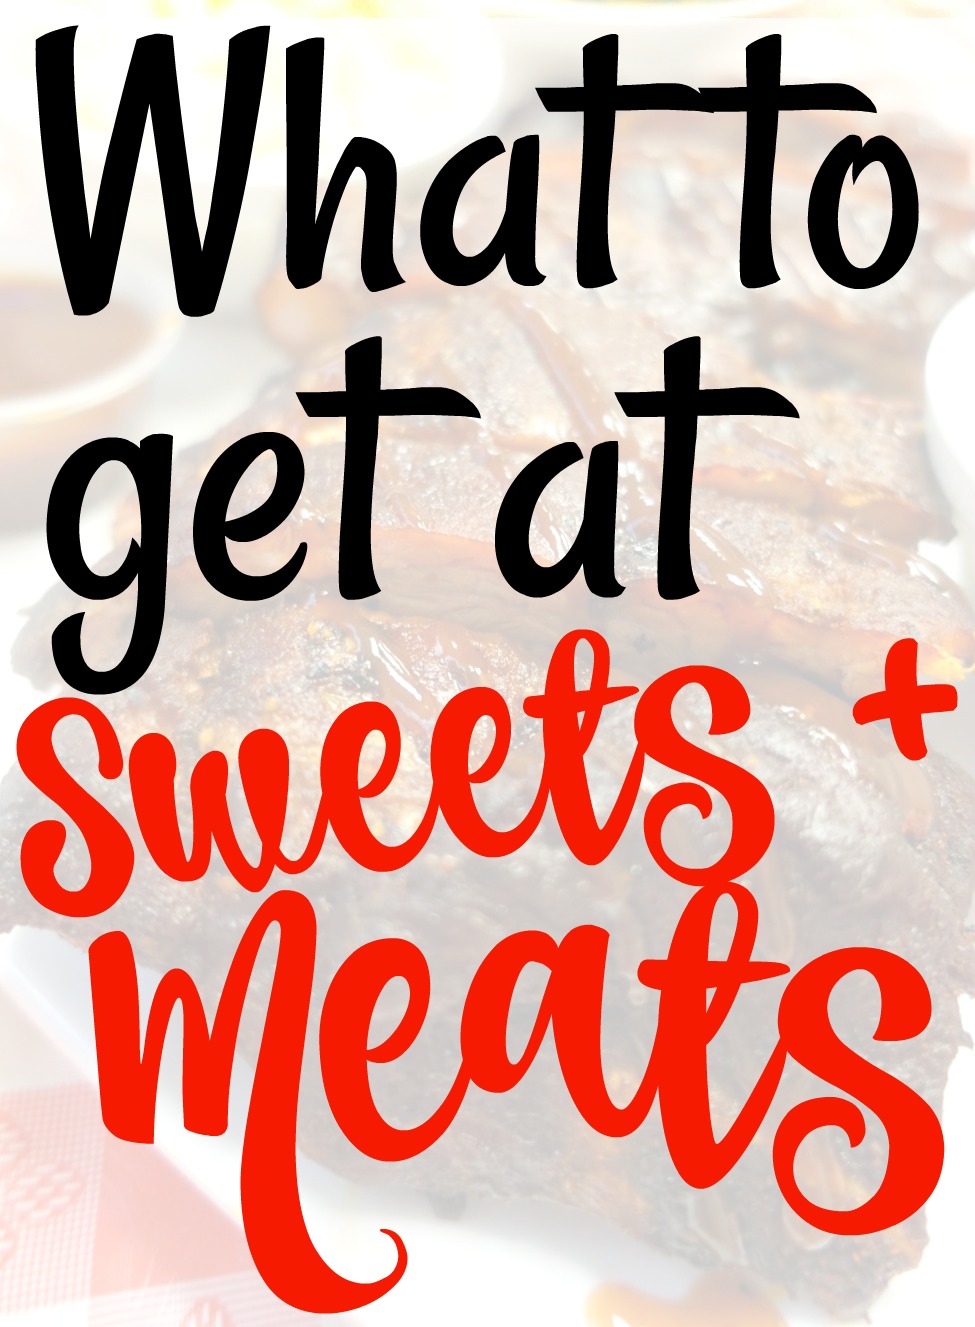 Sweets & Meats is a locally owned barbecue restaurant in Mt Washington with the best pulled chicken and sweet potato casserole I've ever tasted!!